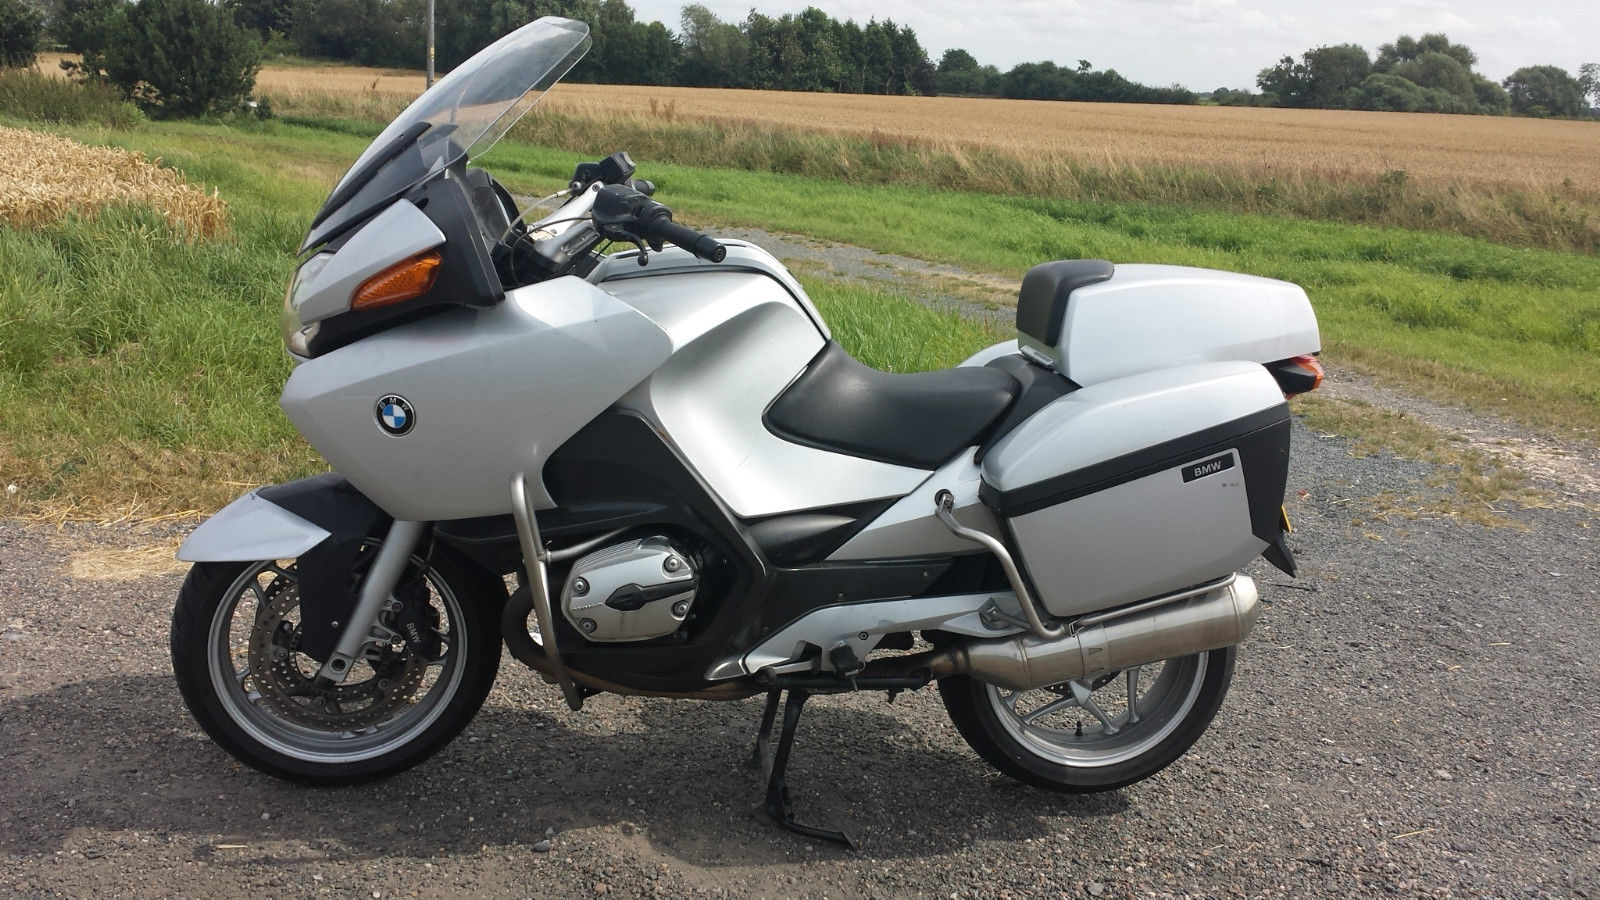 2007 BMW R1200RT R1200 RT R 1200, SILVER, 1 OWNER, HPI